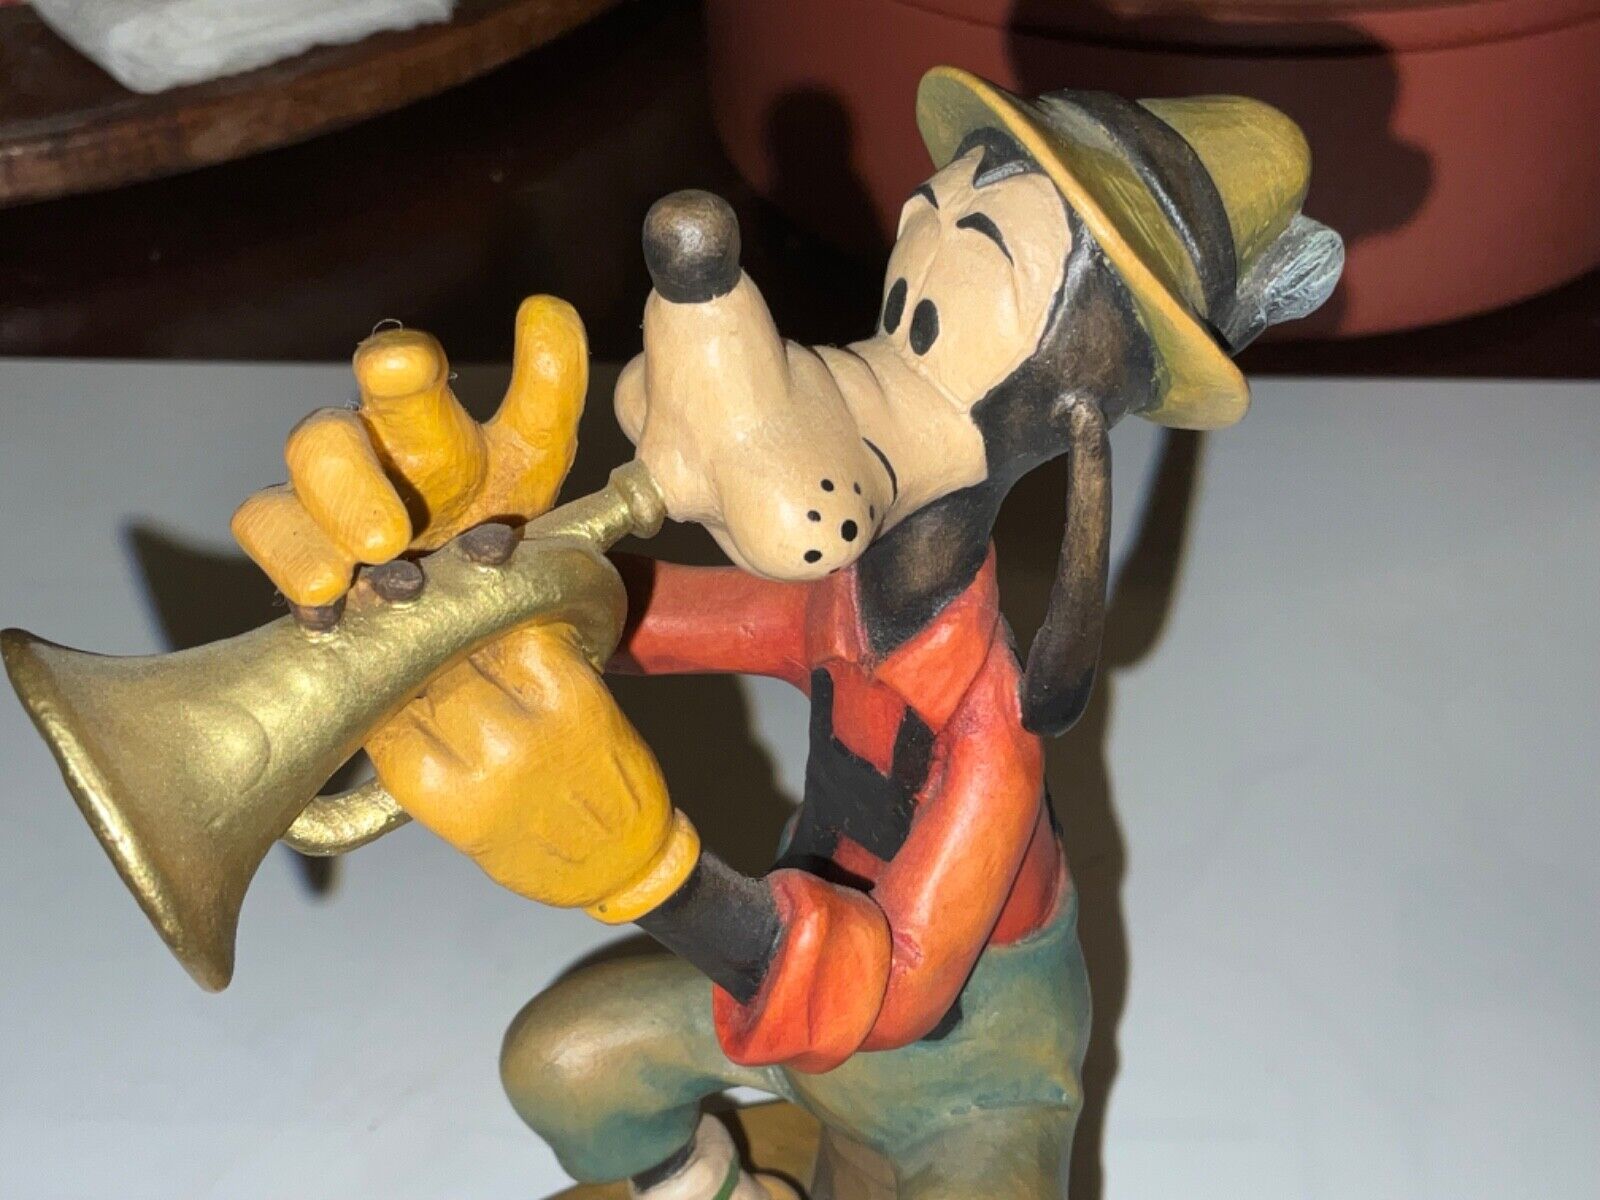 6” Anri Disney hand-carved & hand-painted Goofy woodcarving 199/500